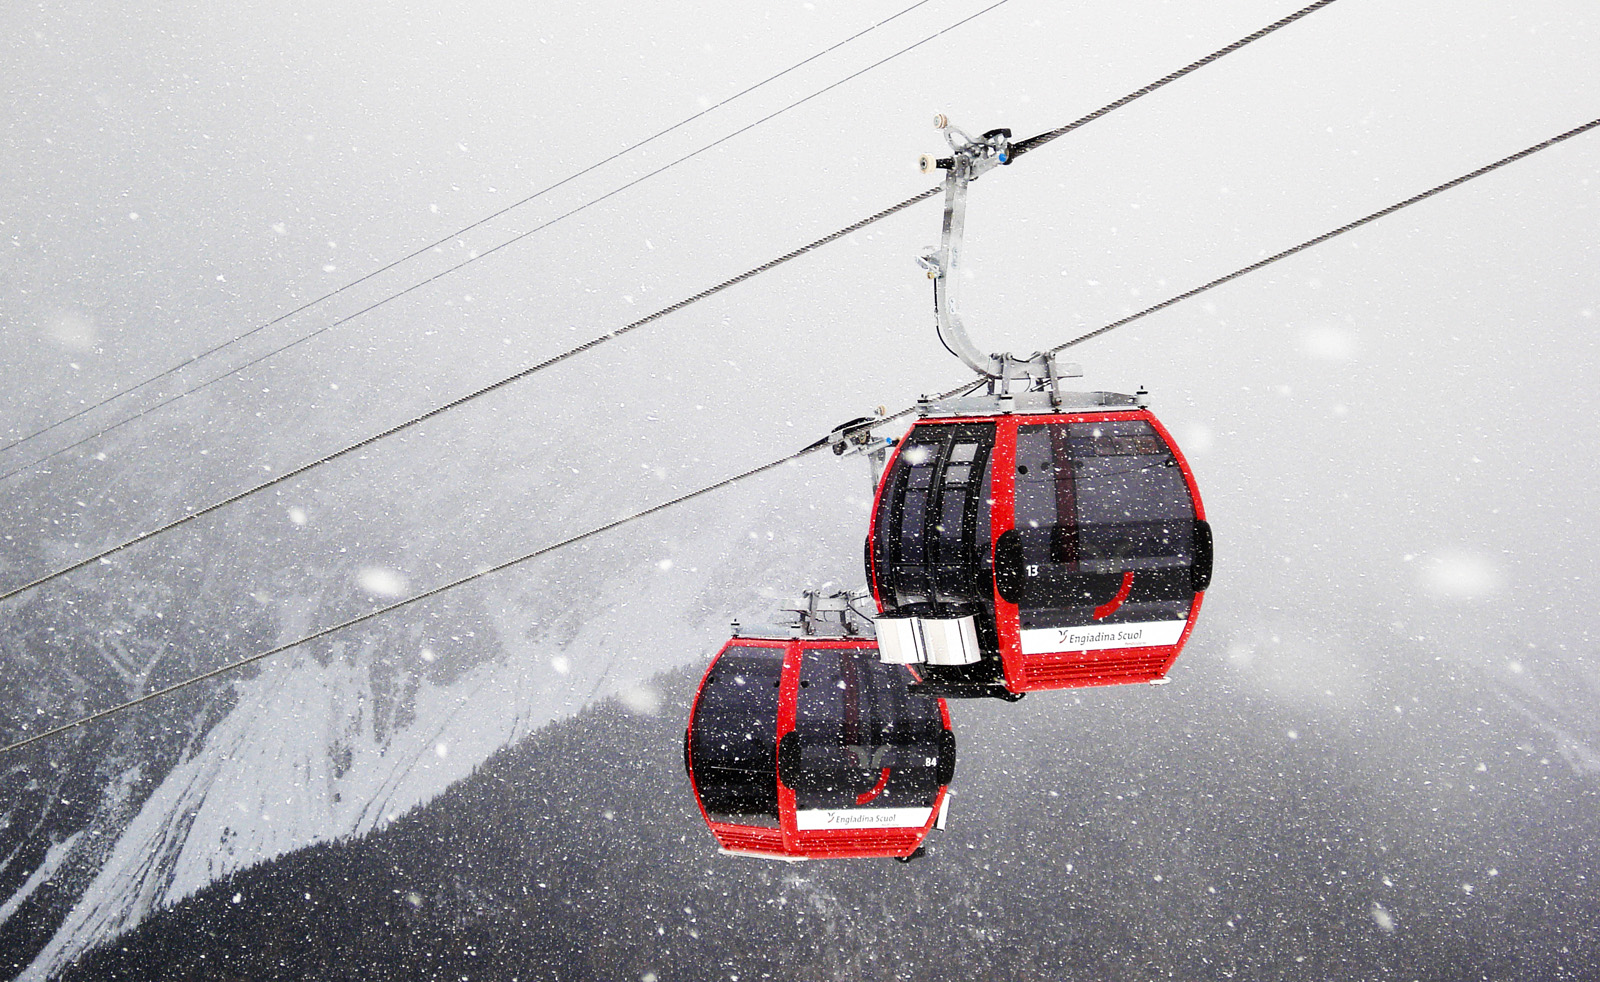 Cable cars work well in the snow